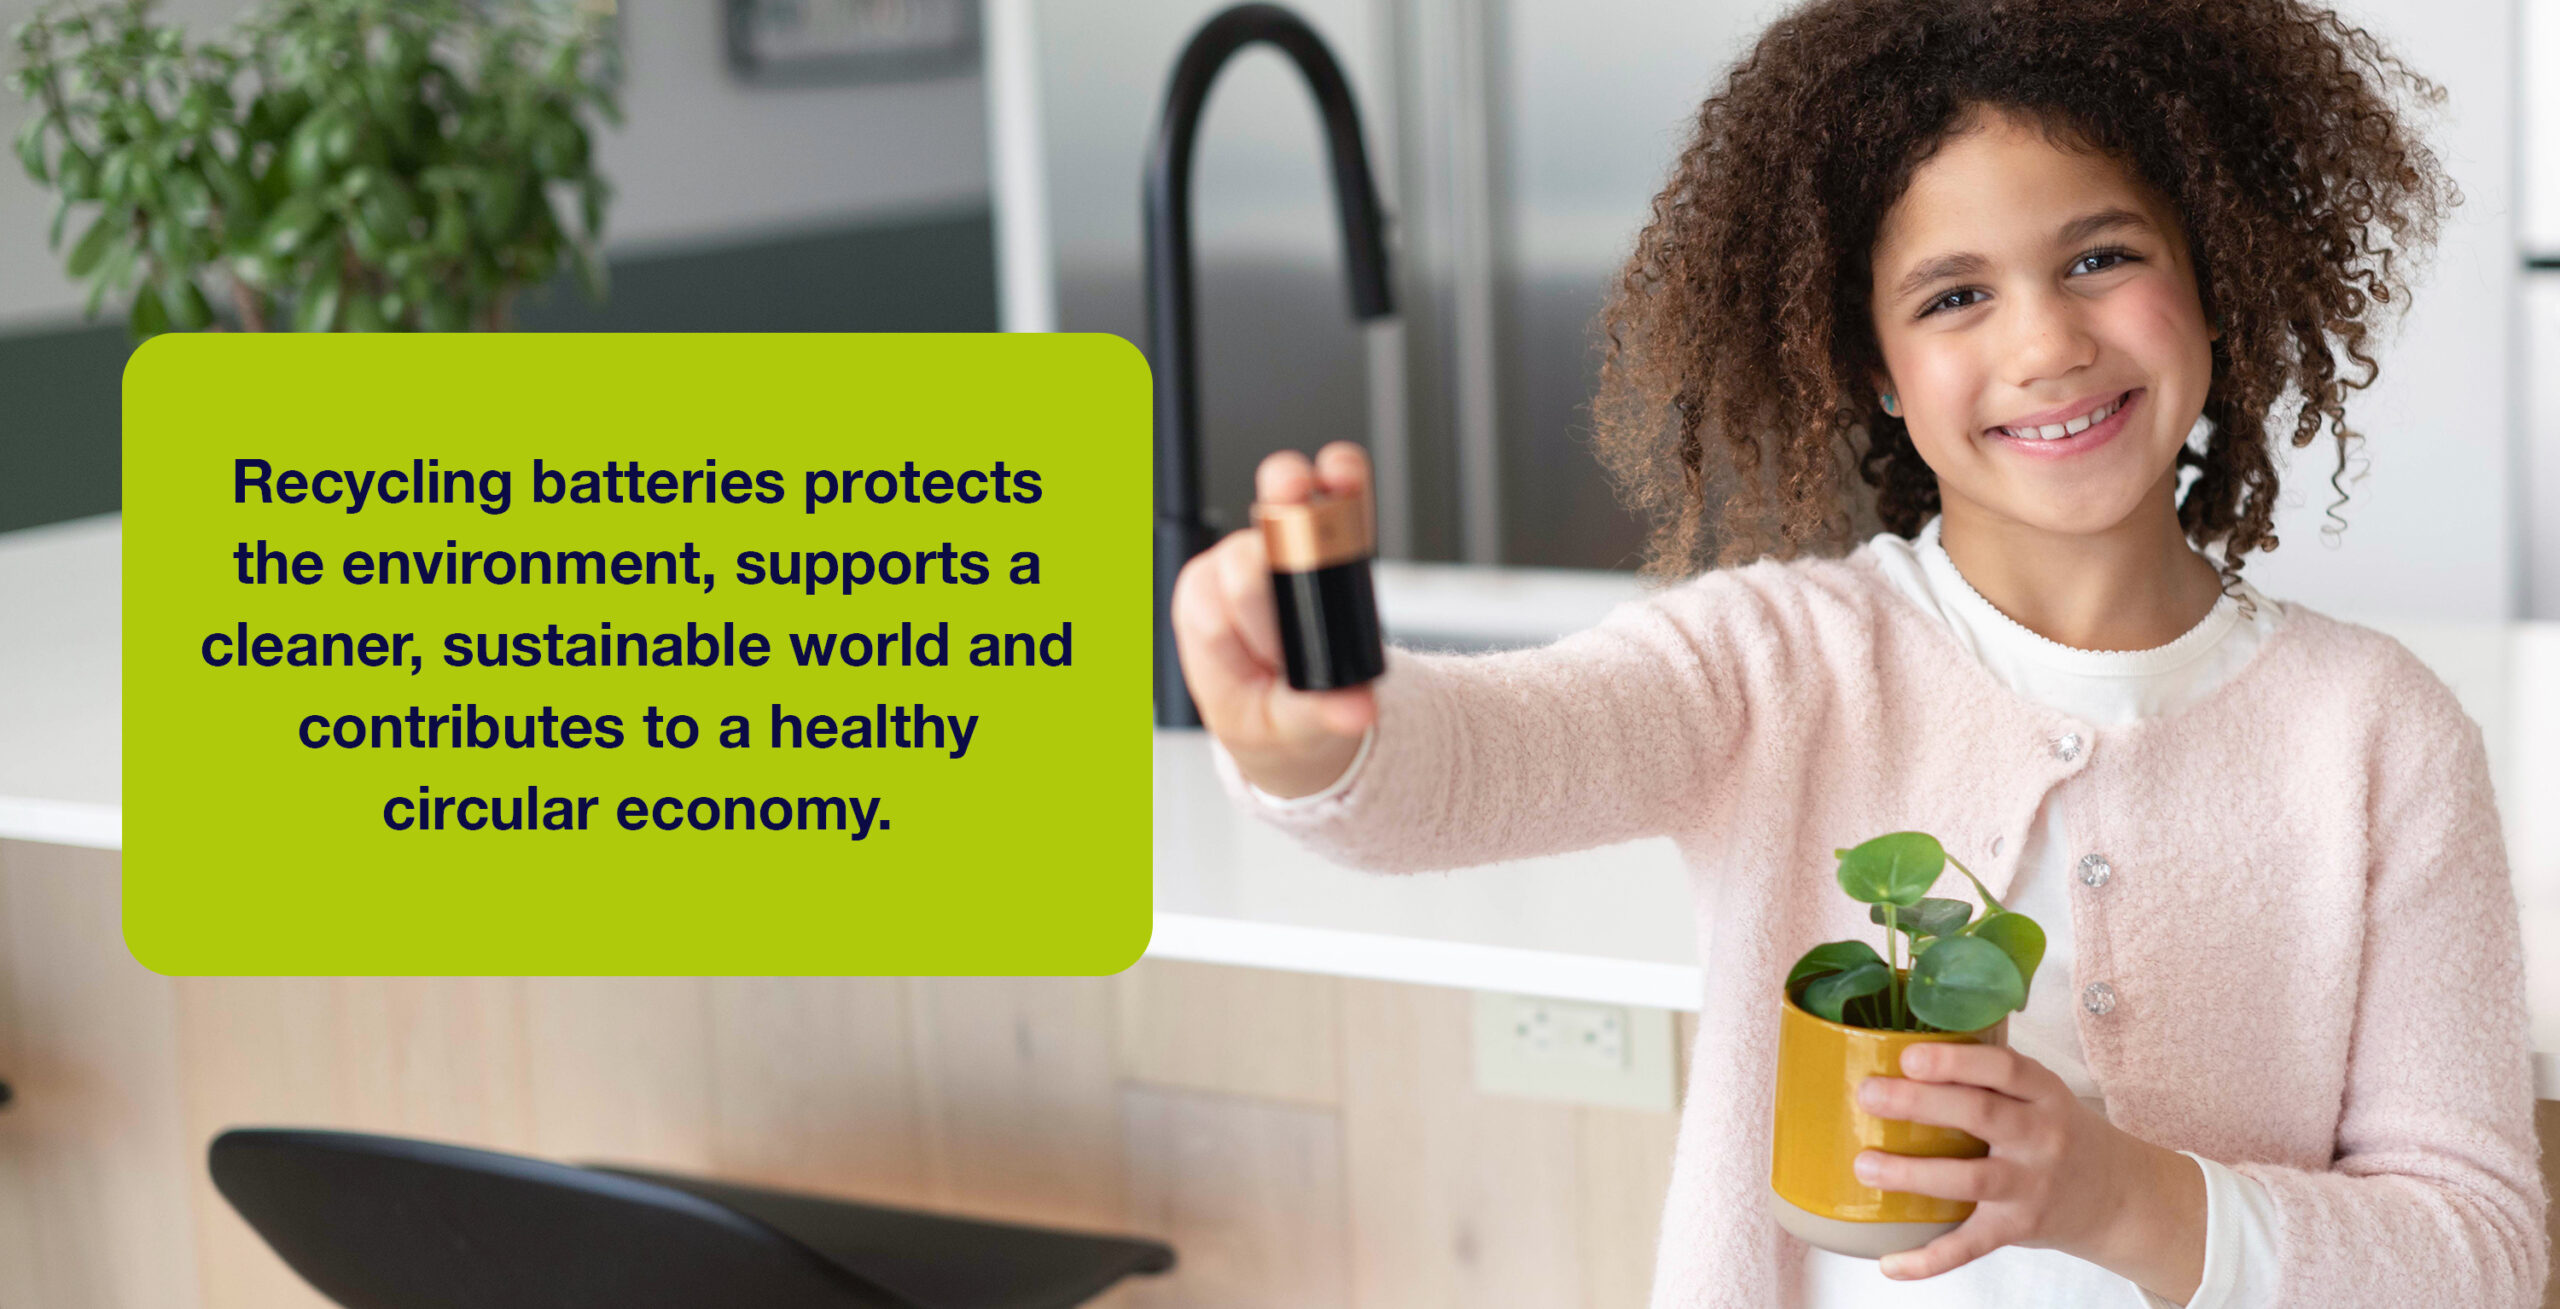 Recyling batteries protects the environment, supports a cleaner, sustainable world and contributes to a healthy circular economy.